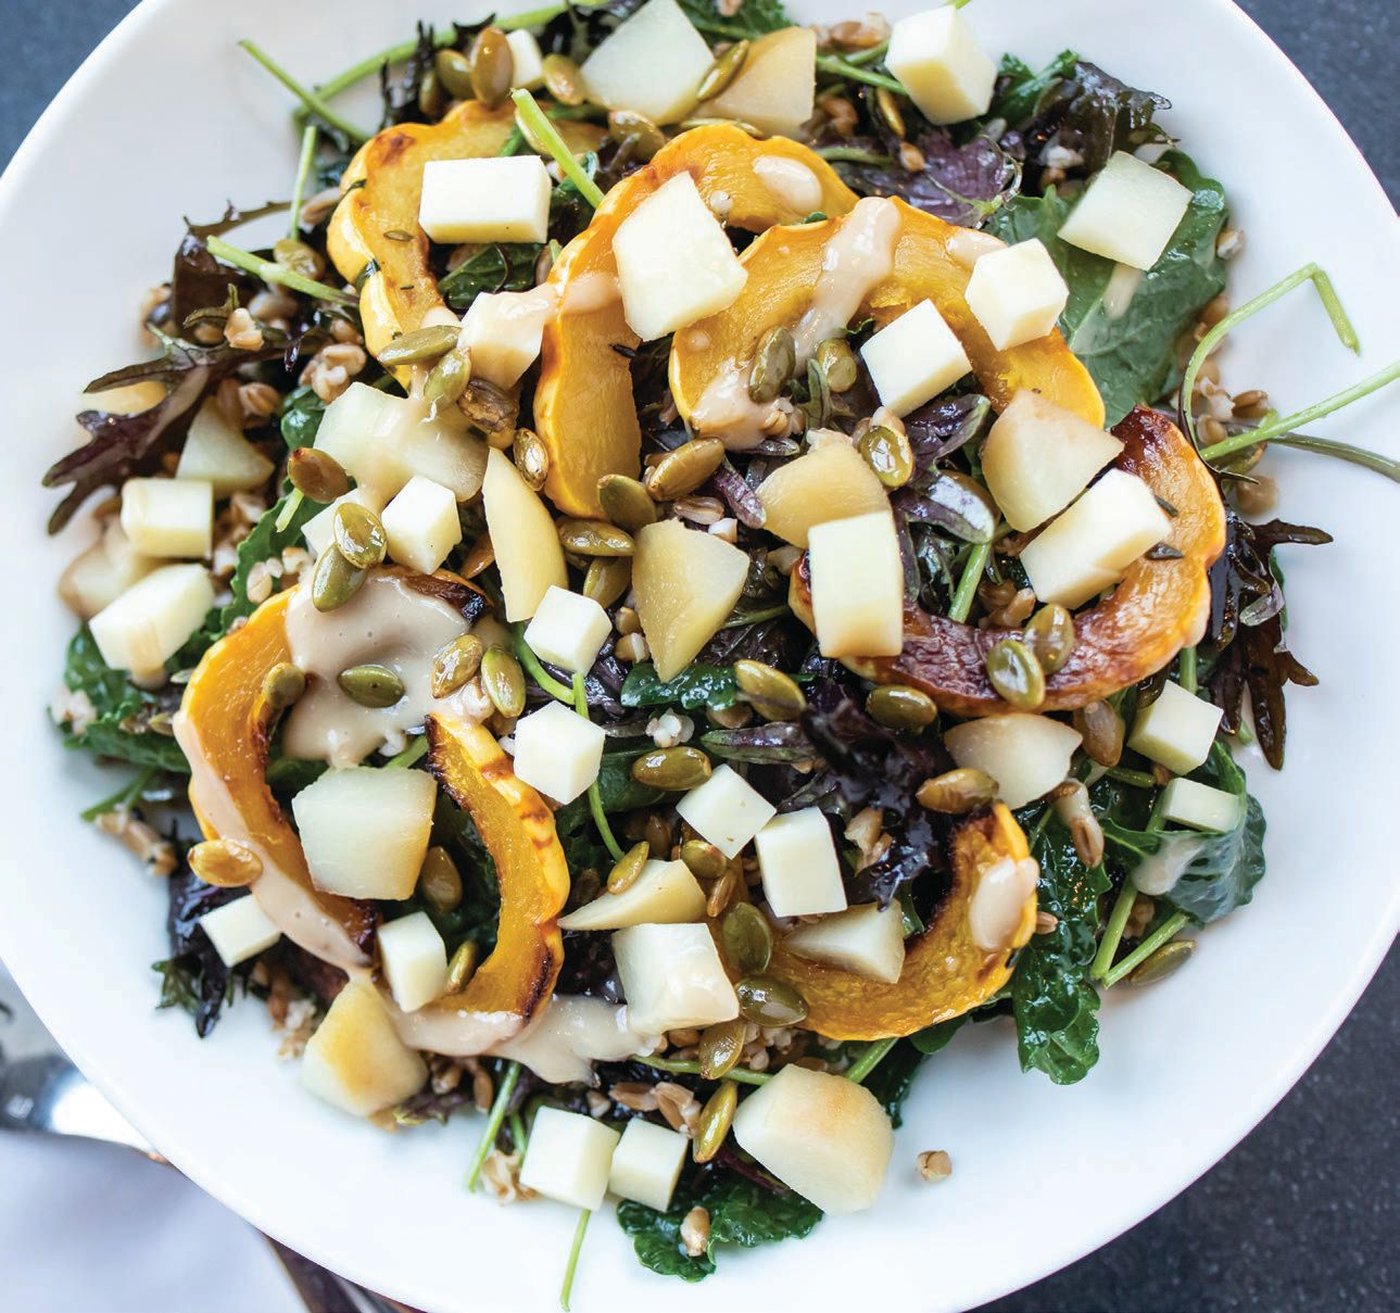 The harvest chopped salad is made with kale, squash, pears, seeds, cheddar and a sherry vinaigrette PHOTO BY EDDY MARENCO